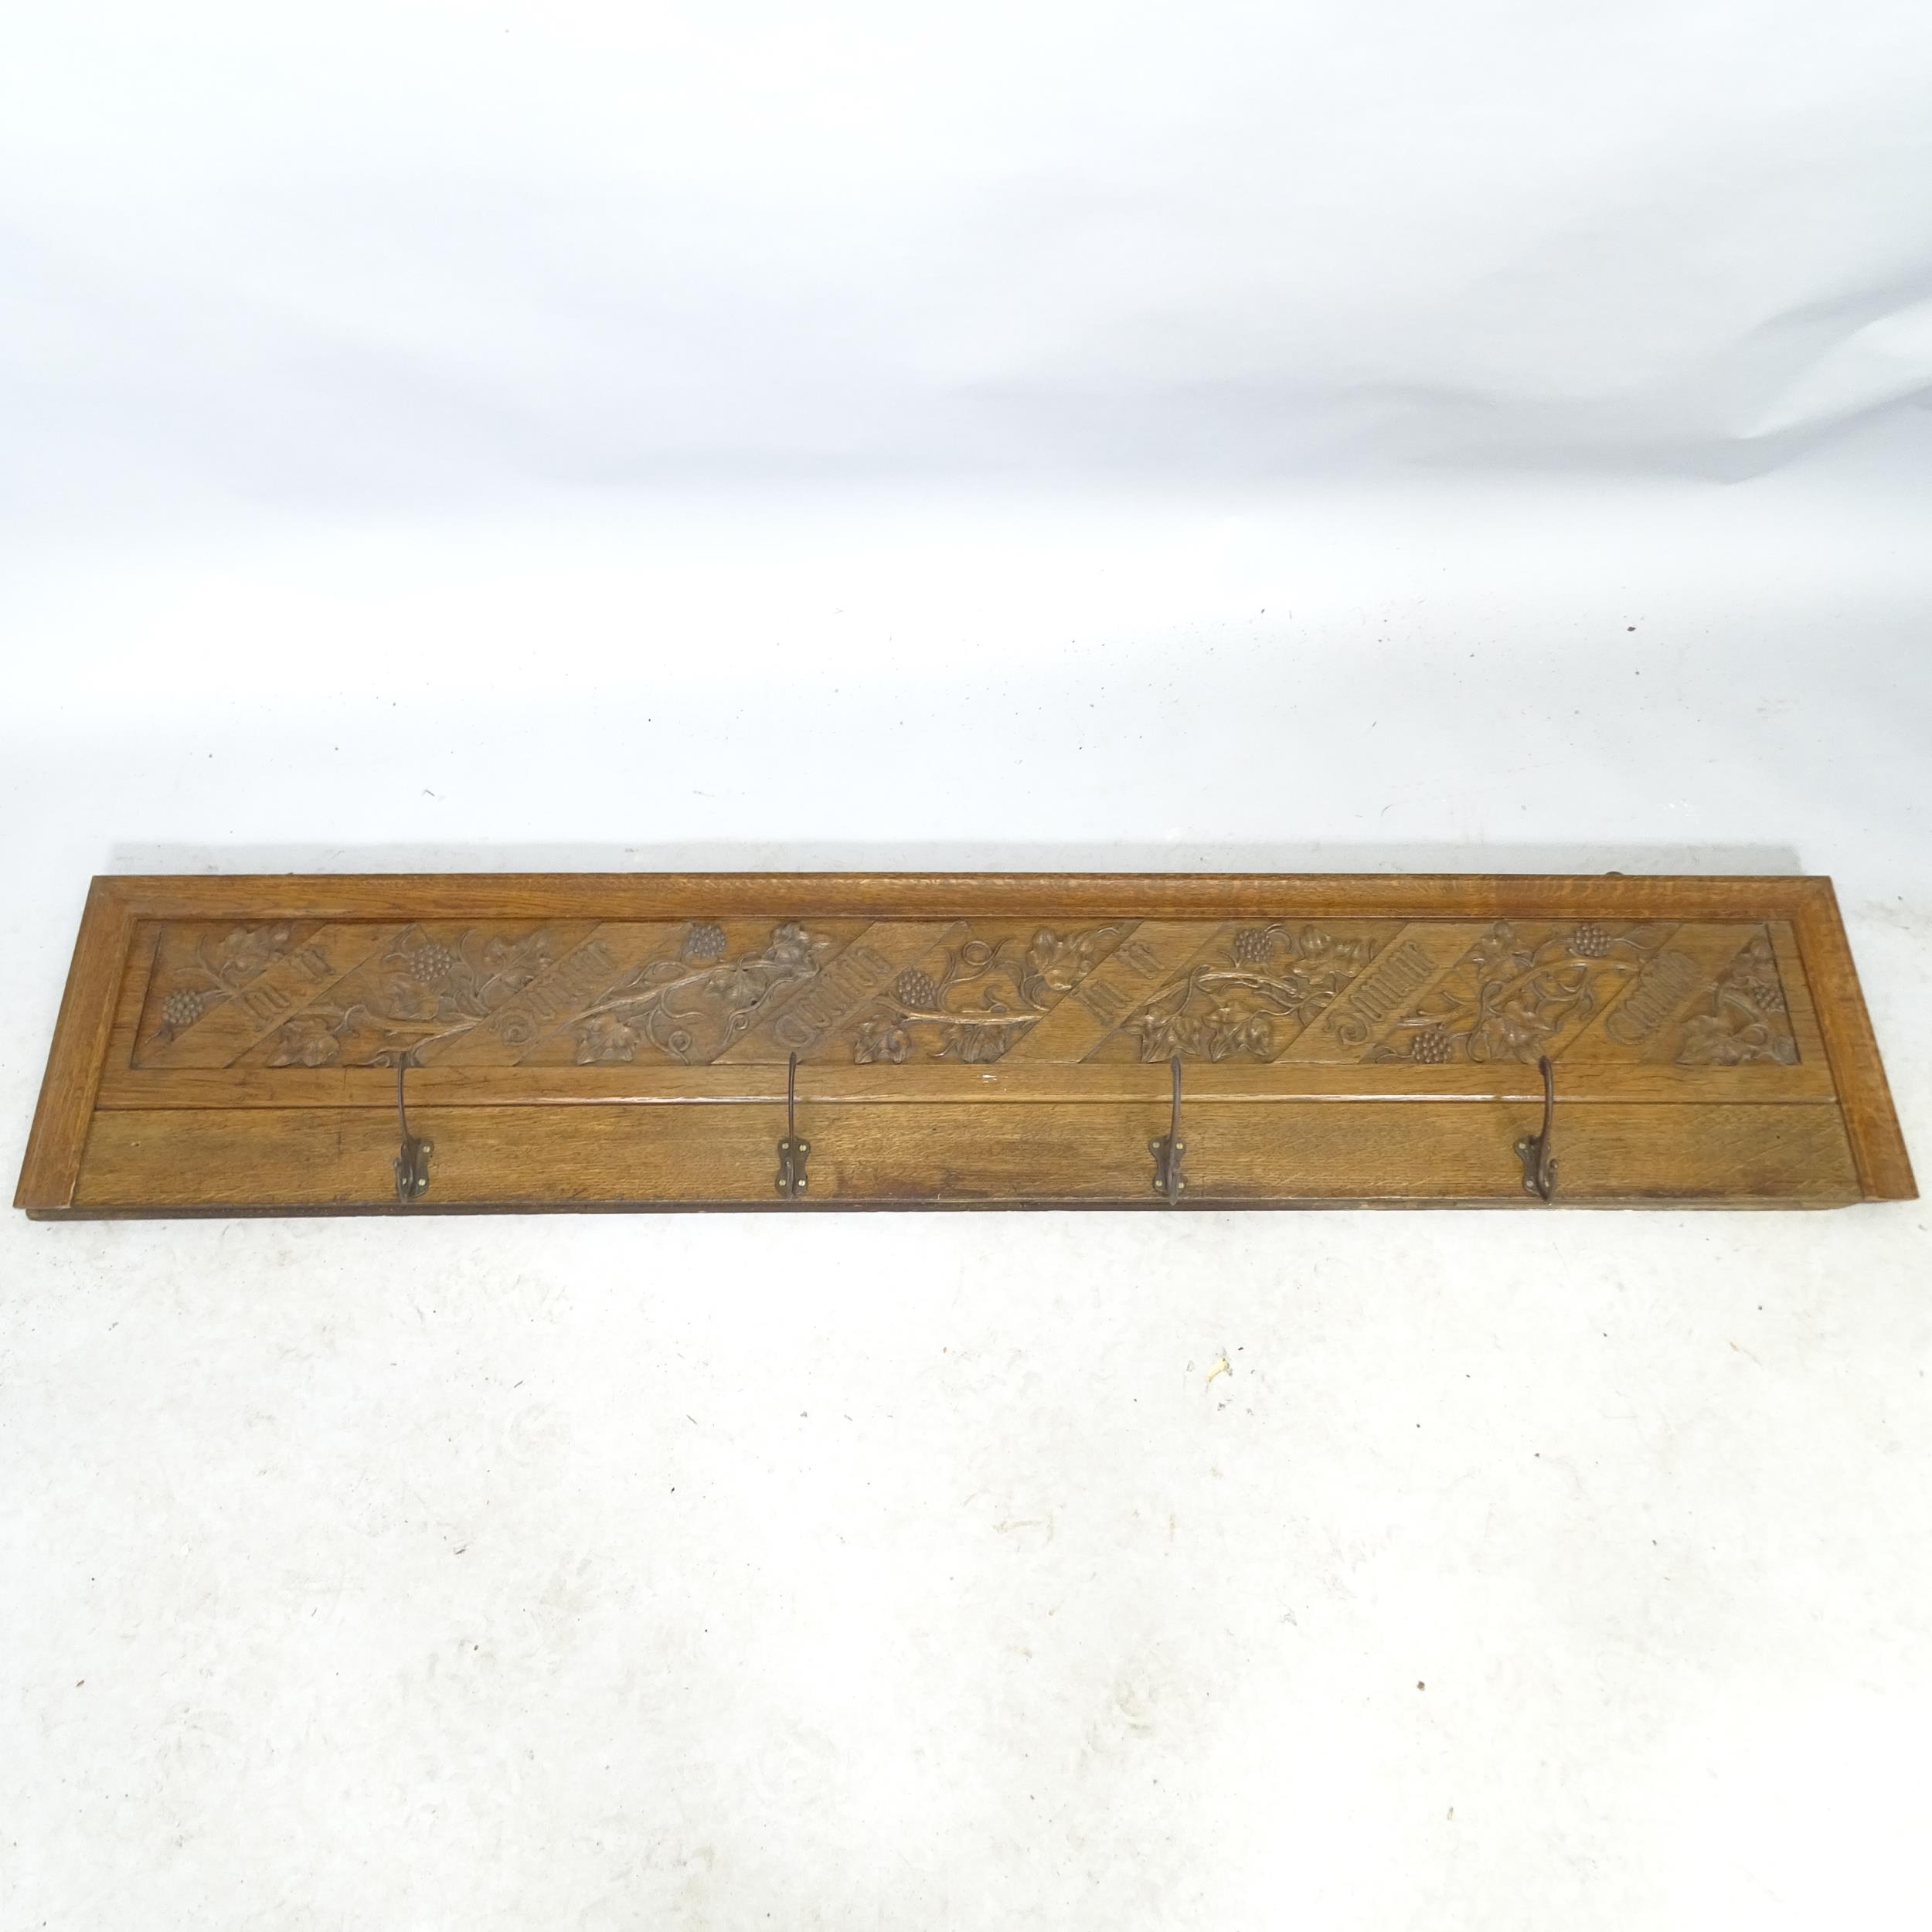 A carved oak Art Nouveau style hanging coat rack with 4 hooks, inscribed In Te Domine Confido. 153cm